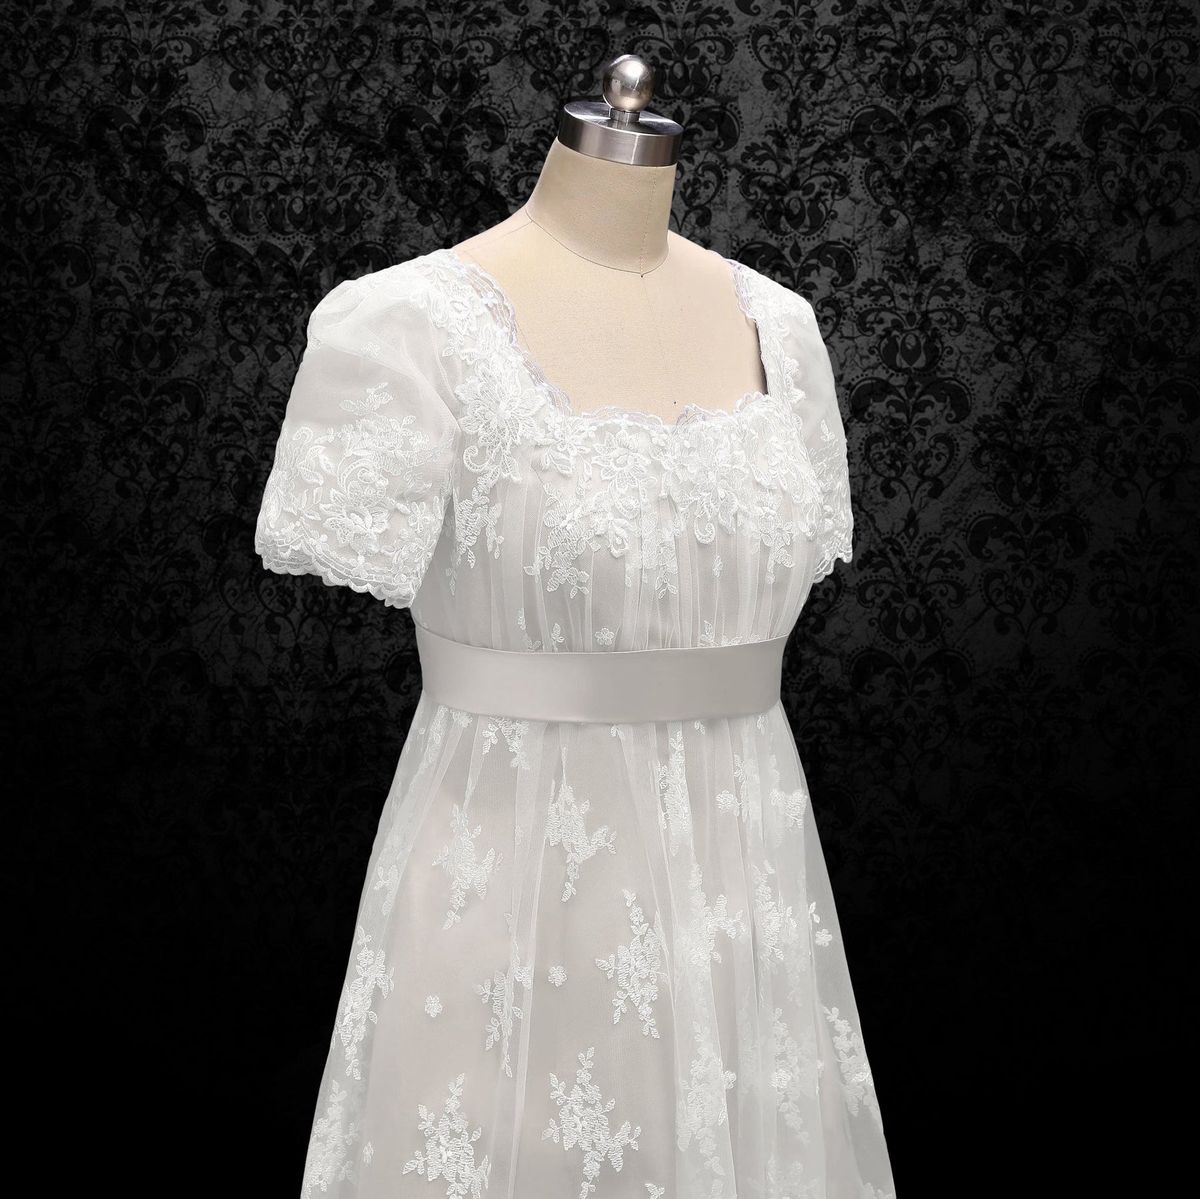 Wonderland By Lilian Plus Size 24 Prom Lace White A-line Dress on Queenly